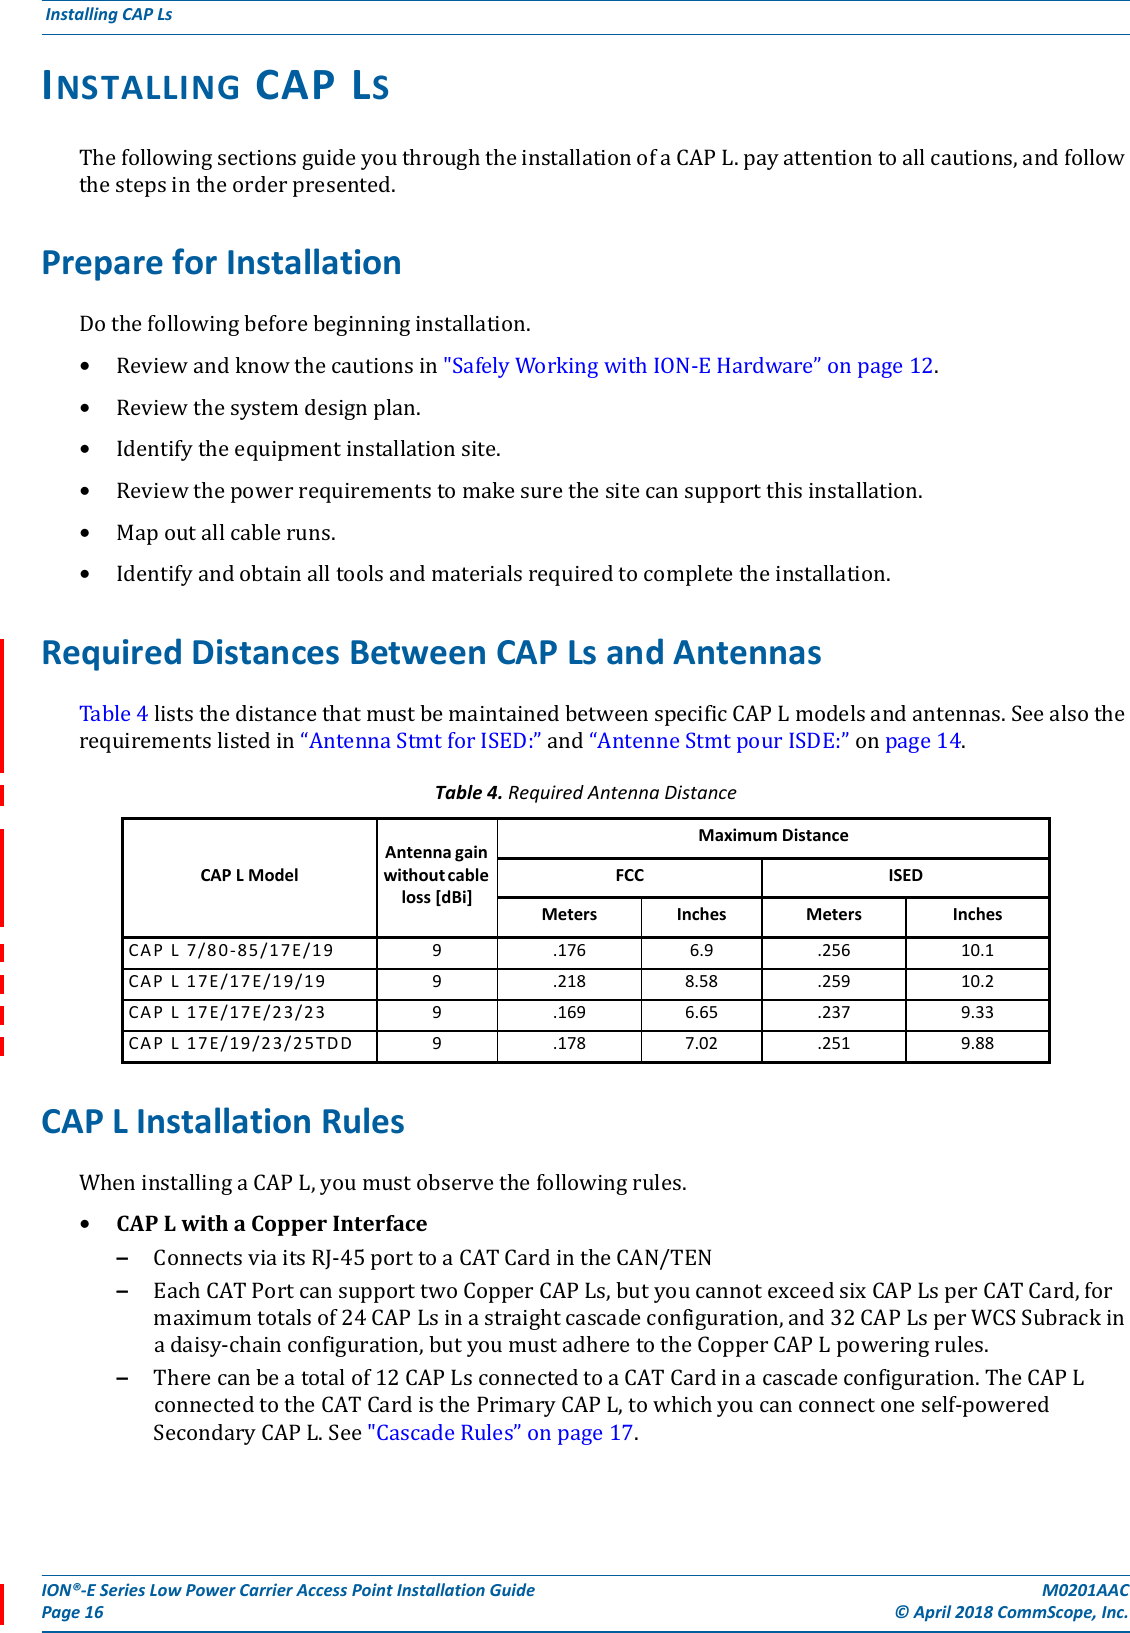 ION®-E Series Low Power Carrier Access Point Installation Guide M0201AACPage 16 © April 2018 CommScope, Inc. Installing CAP Ls  INSTALLING CAP LSThefollowingsectionsguideyouthroughtheinstallationofaCAPL.payattentiontoallcautions,andfollowthestepsintheorderpresented.Prepare for InstallationDothefollowingbeforebeginninginstallation.•Reviewandknowthecautionsin&quot;SafelyWorkingwithION-EHardware”onpage12.•Reviewthesystemdesignplan.•Identifytheequipmentinstallationsite.•Reviewthepowerrequirementstomakesurethesitecansupportthisinstallation.•Mapoutallcableruns.•Identifyandobtainalltoolsandmaterialsrequiredtocompletetheinstallation.Required Distances Between CAP Ls and AntennasTable4liststhedistancethatmustbemaintainedbetweenspecificCAPLmodelsandantennas.Seealsotherequirementslistedin“AntennaStmtforISED:”and“AntenneStmtpourISDE:”onpage14.CAP L Installation RulesWheninstallingaCAPL,youmustobservethefollowingrules.•CAPLwithaCopperInterface–ConnectsviaitsRJ-45porttoaCATCardintheCAN/TEN–EachCATPortcansupporttwoCopperCAPLs,butyoucannotexceedsixCAPLsperCATCard,formaximumtotalsof24CAPLsinastraightcascadeconfiguration,and32CAPLsperWCSSubrackinadaisy-chainconfiguration,butyoumustadheretotheCopperCAPLpoweringrules.–Therecanbeatotalof12CAPLsconnectedtoaCATCardinacascadeconfiguration.TheCAPLconnectedtotheCATCardisthePrimaryCAPL,towhichyoucanconnectoneself-poweredSecondaryCAPL.See&quot;CascadeRules”onpage17.Table 4. Required Antenna DistanceCAP L ModelAntenna gain without cable loss [dBi]Maximum DistanceFCC ISEDMeters Inches Meters InchesCAP  L  7 /80-85 / 17 E/19 9 .176 6.9 .256 10.1CAP L 17E/17E/19/19 9 .218 8.58 .259 10.2CAP  L  1 7E/17 E /2 3/23 9 .169 6.65 .237 9.33CAP  L  1 7E/19 / 23 / 25TDD 9 .178 7.02 .251 9.88